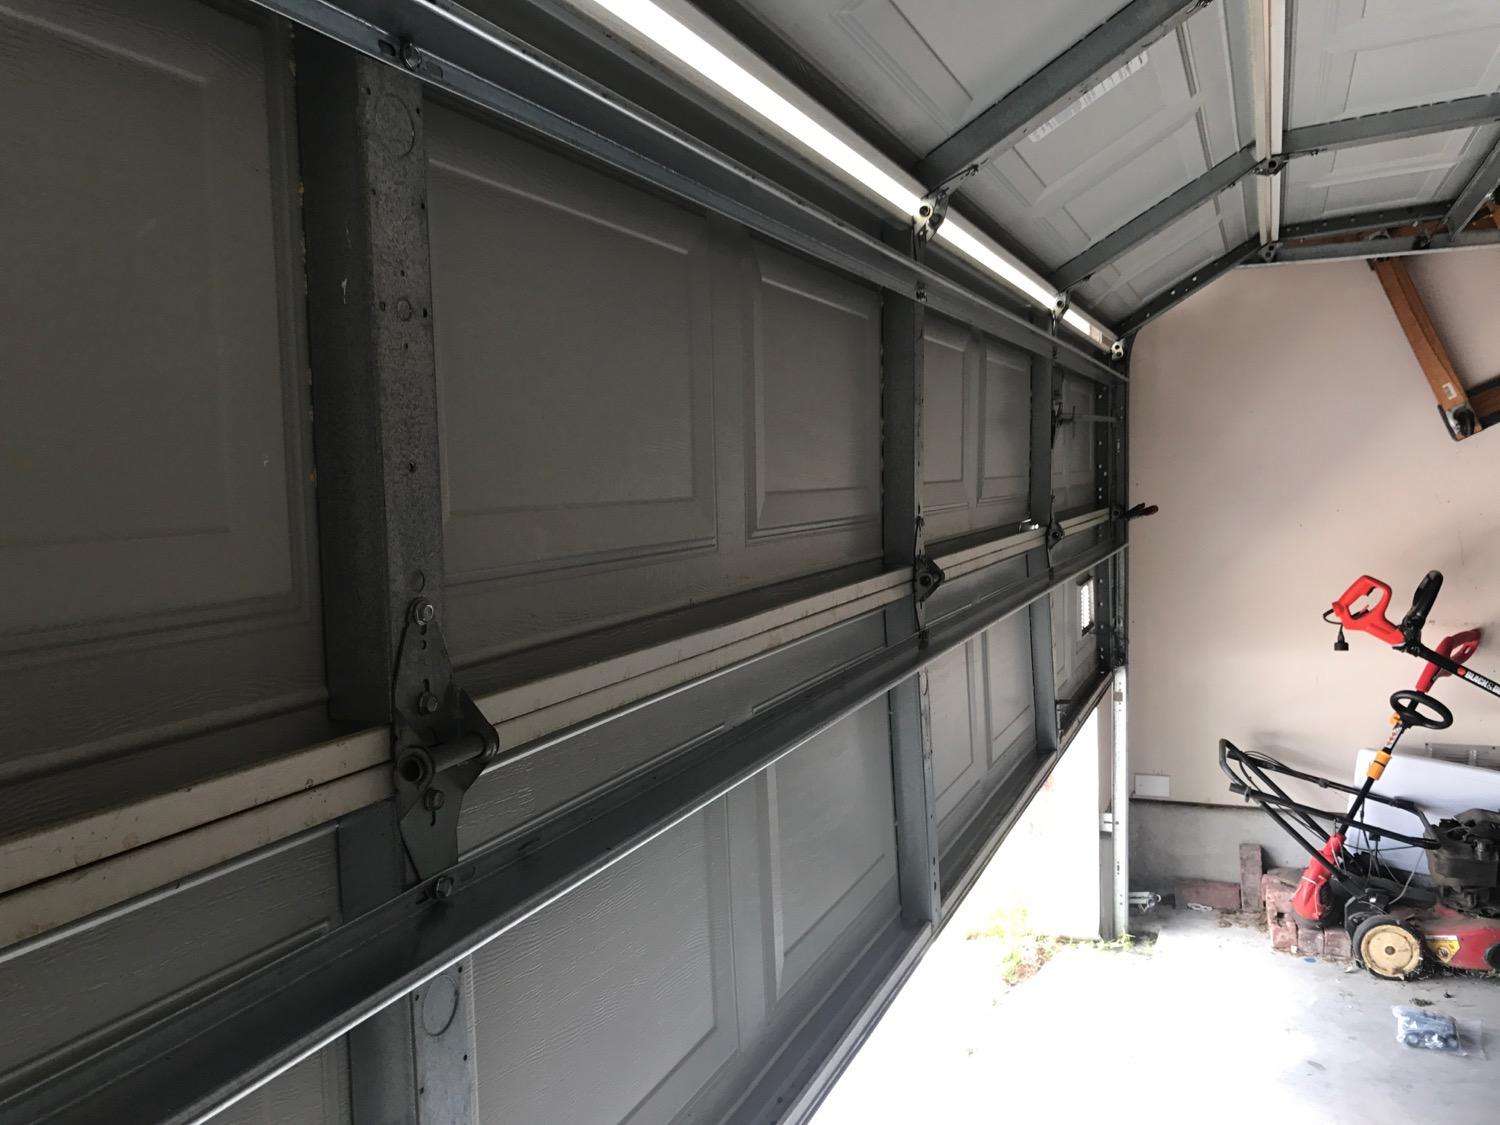 Here is another photo showing 16ft struts installed on the bottom and second sections of a double car garage door. As you can see they are installed at the top of the section.